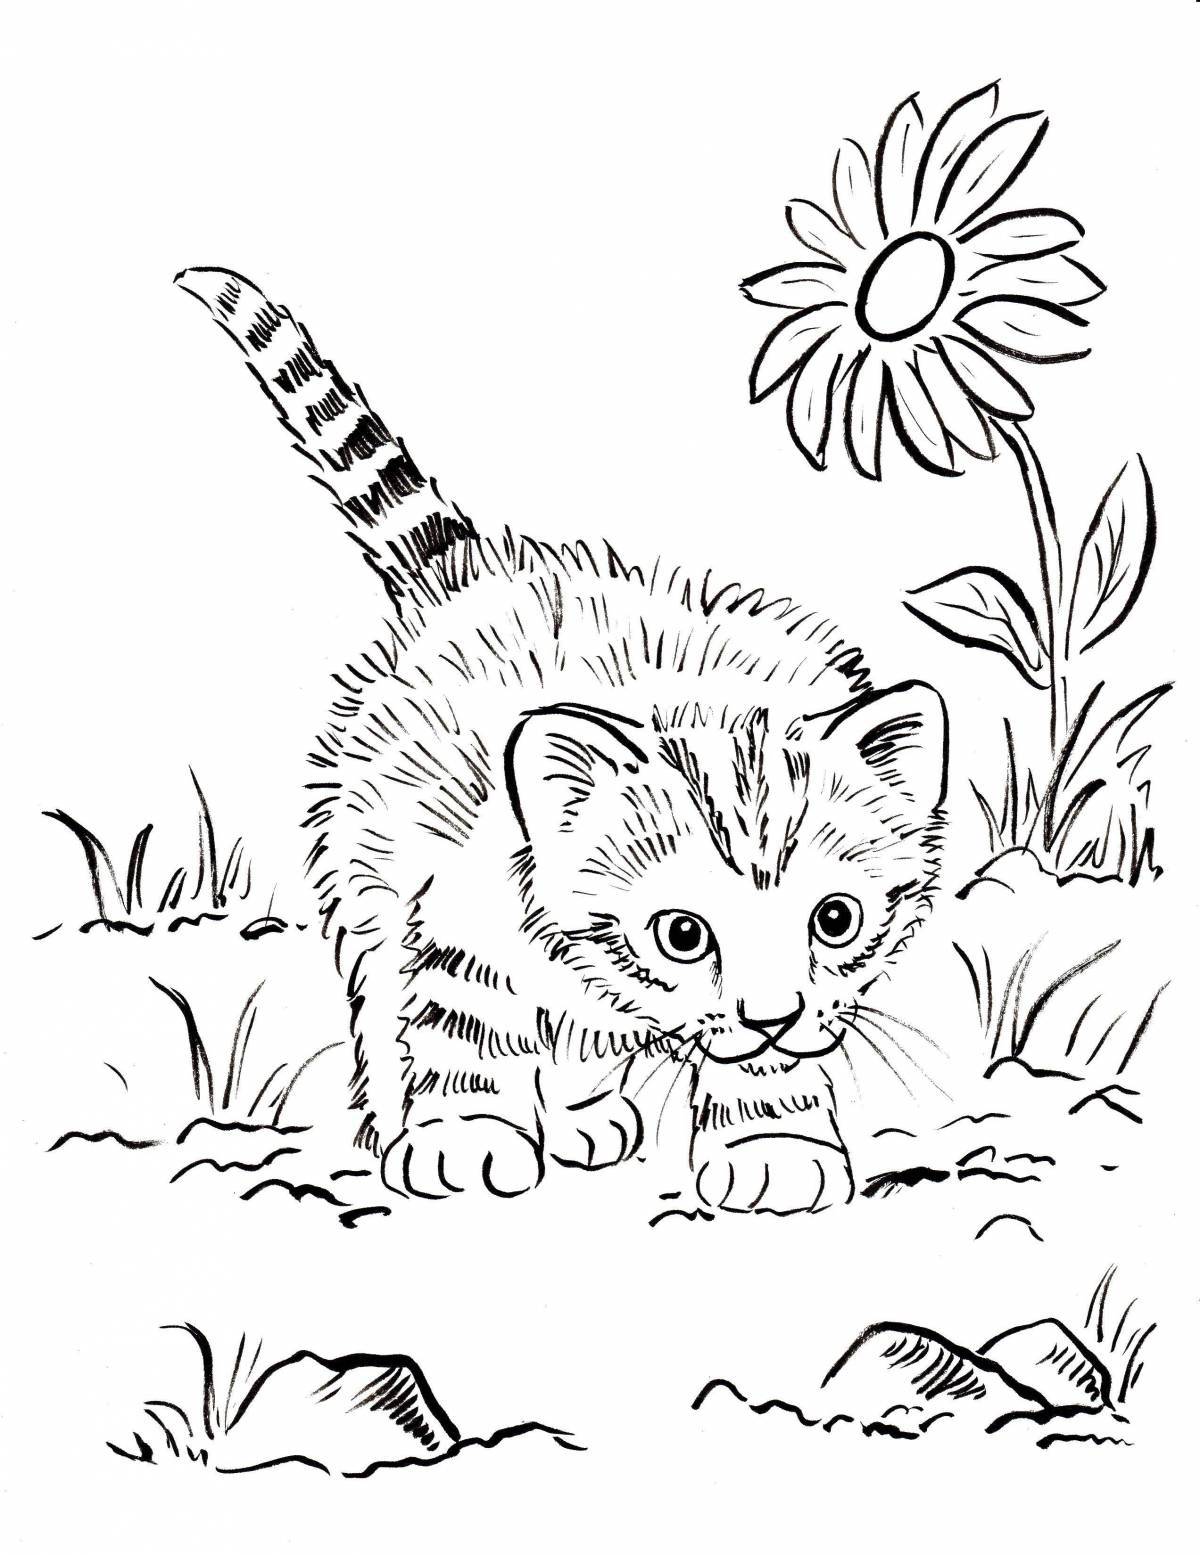 Snuggly coloring page cat with kittens